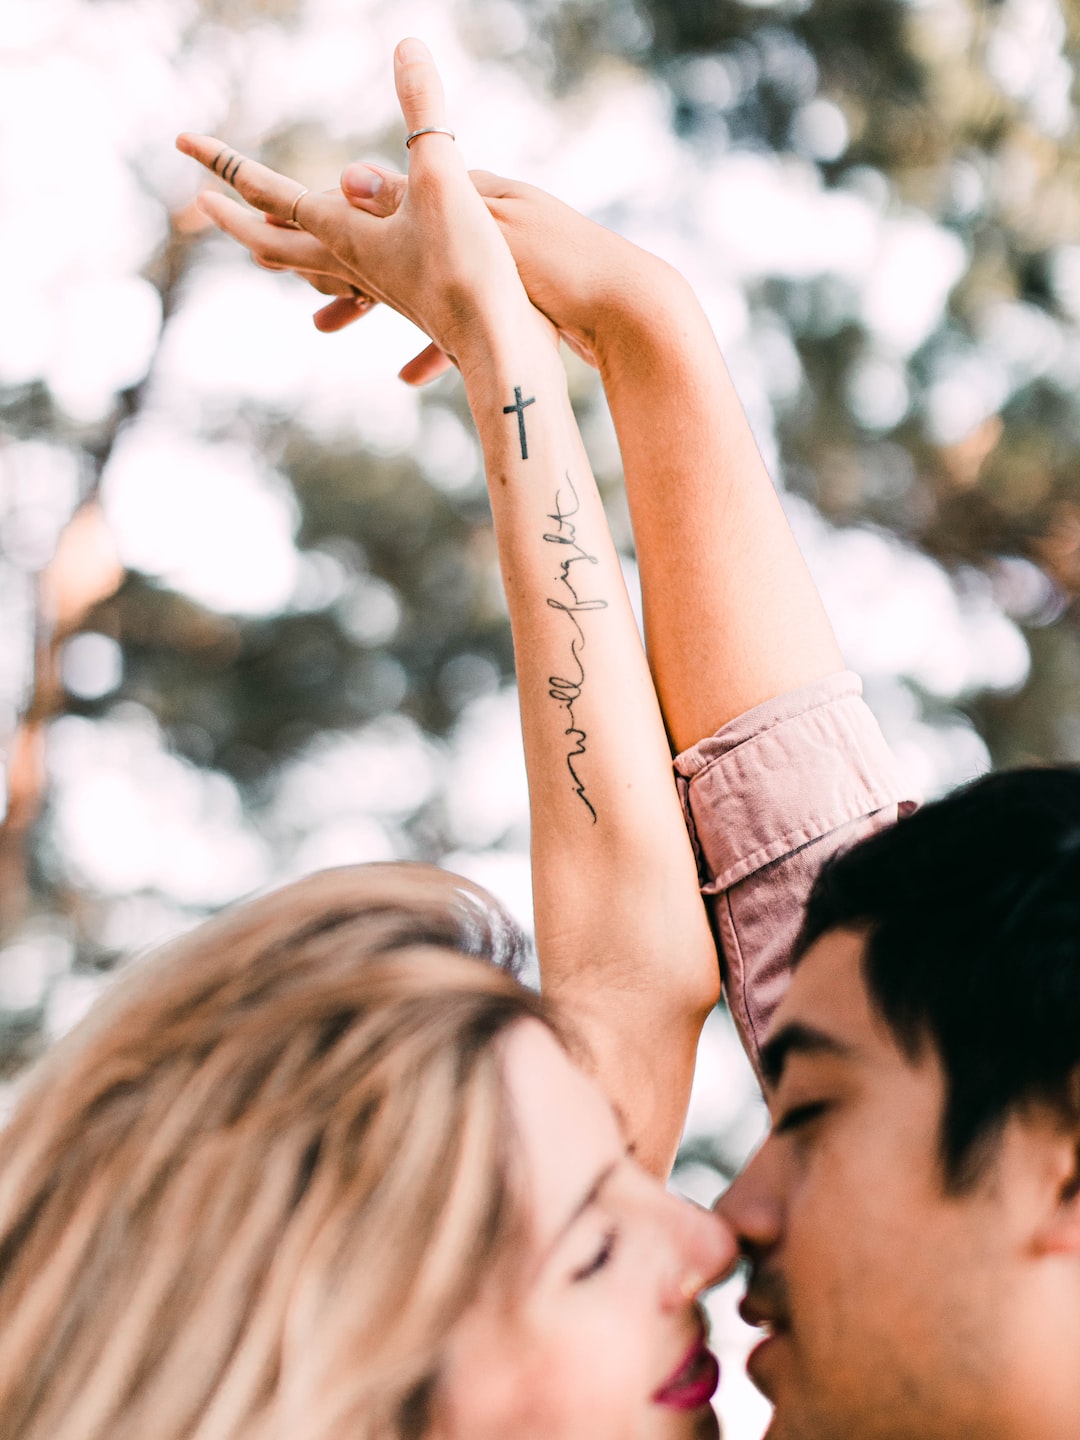 Common Tattoo Aftercare Mistakes to Avoid for Beautiful and Lasting Ink